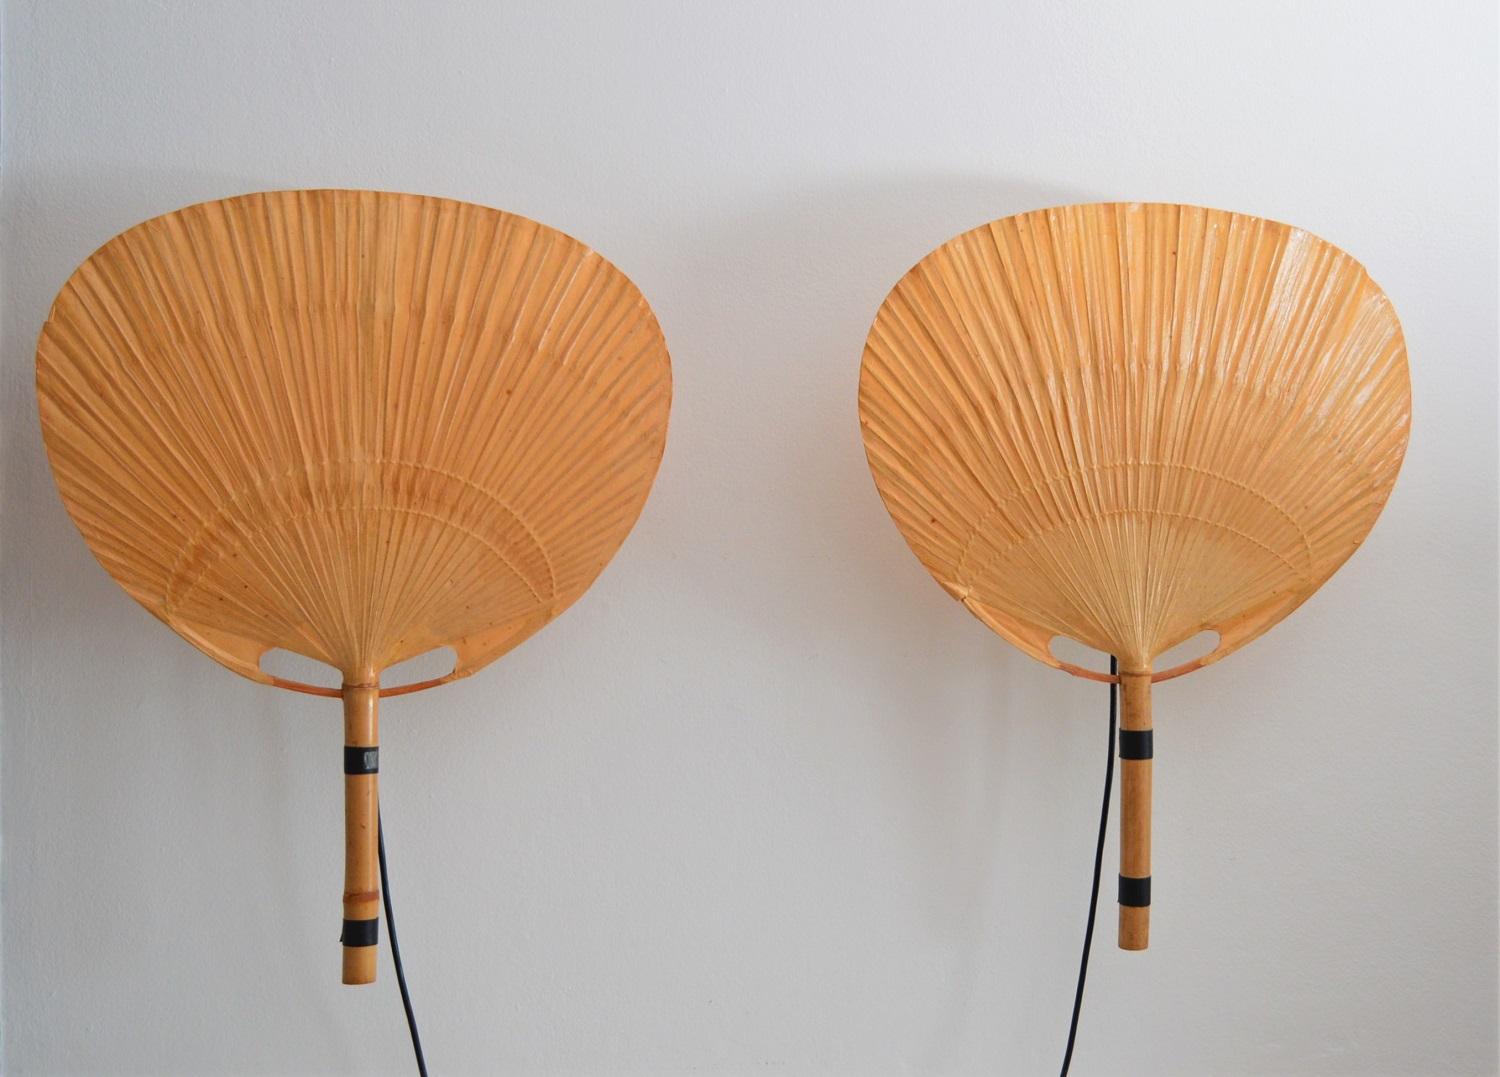 Two pieces of big vintage Uchiwa fan lamps with metal holder for wall hanging.
Designed from Ingo Maurer, Germany in 1973.
All fans are made of bamboo and rice paper.
The metal holders are equipped with original Edison bulb holders.
The lamps